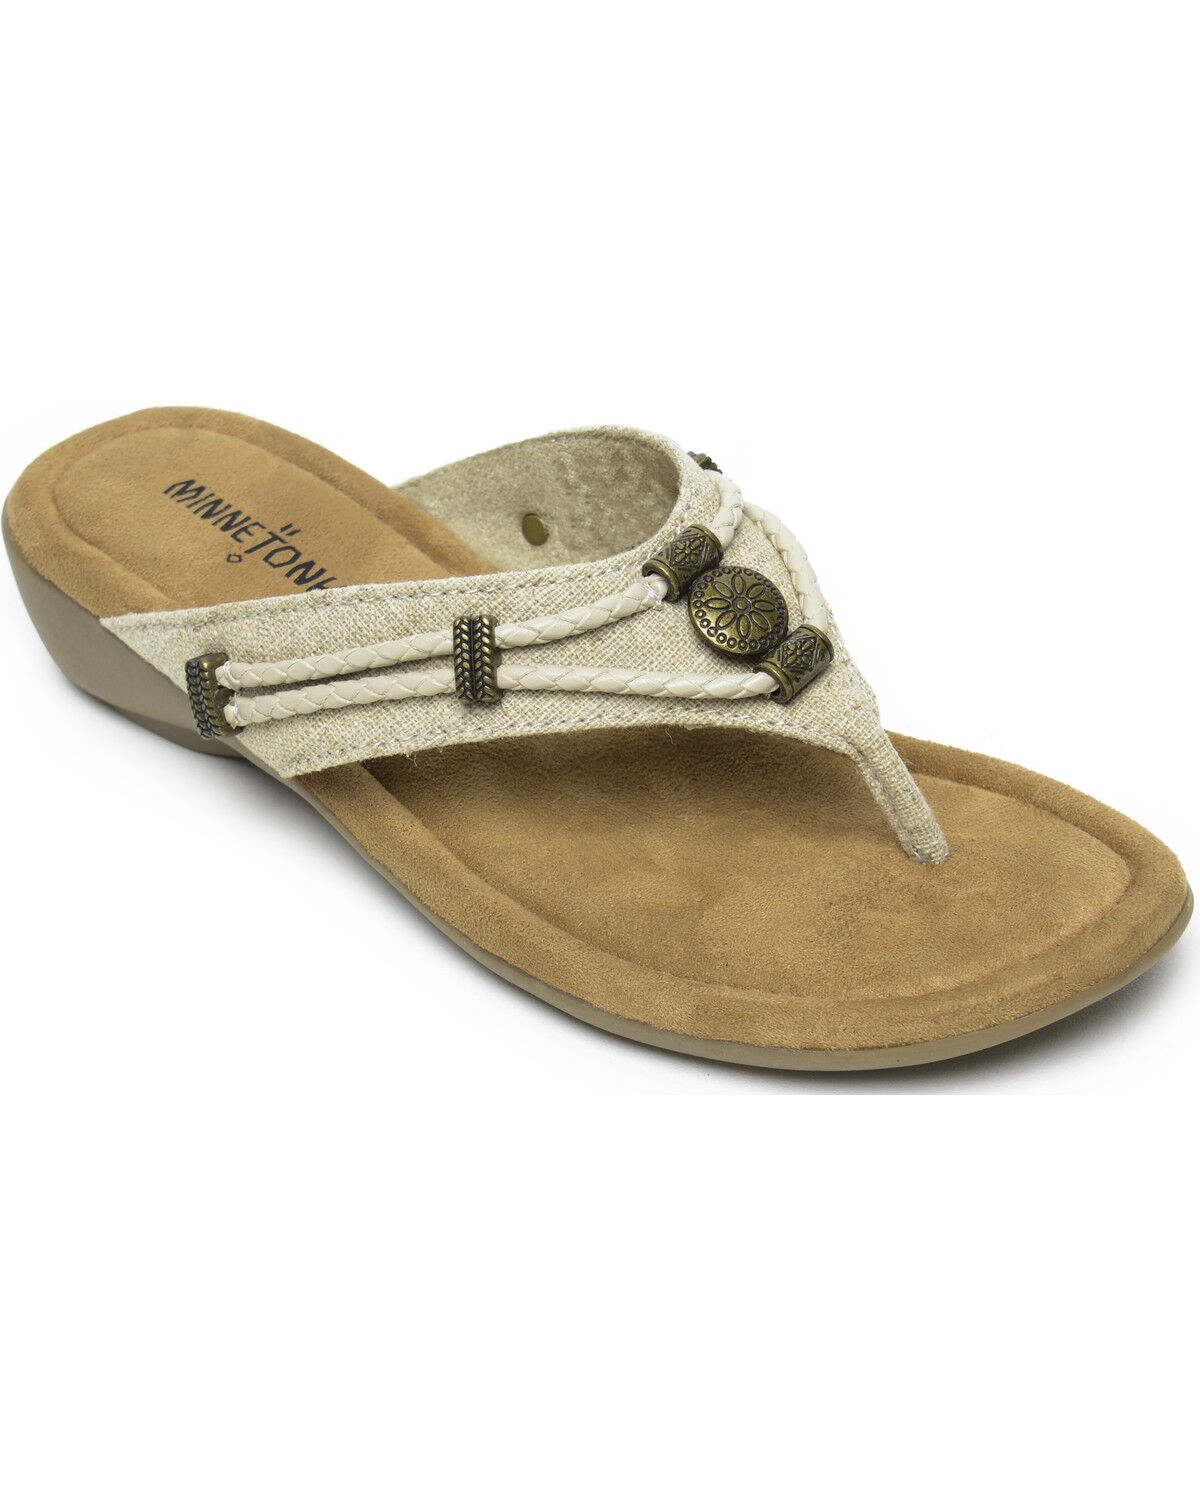 Free Shipping! Details about   Minnetonka Silverthorne Leather Crocs Thongs NEW!